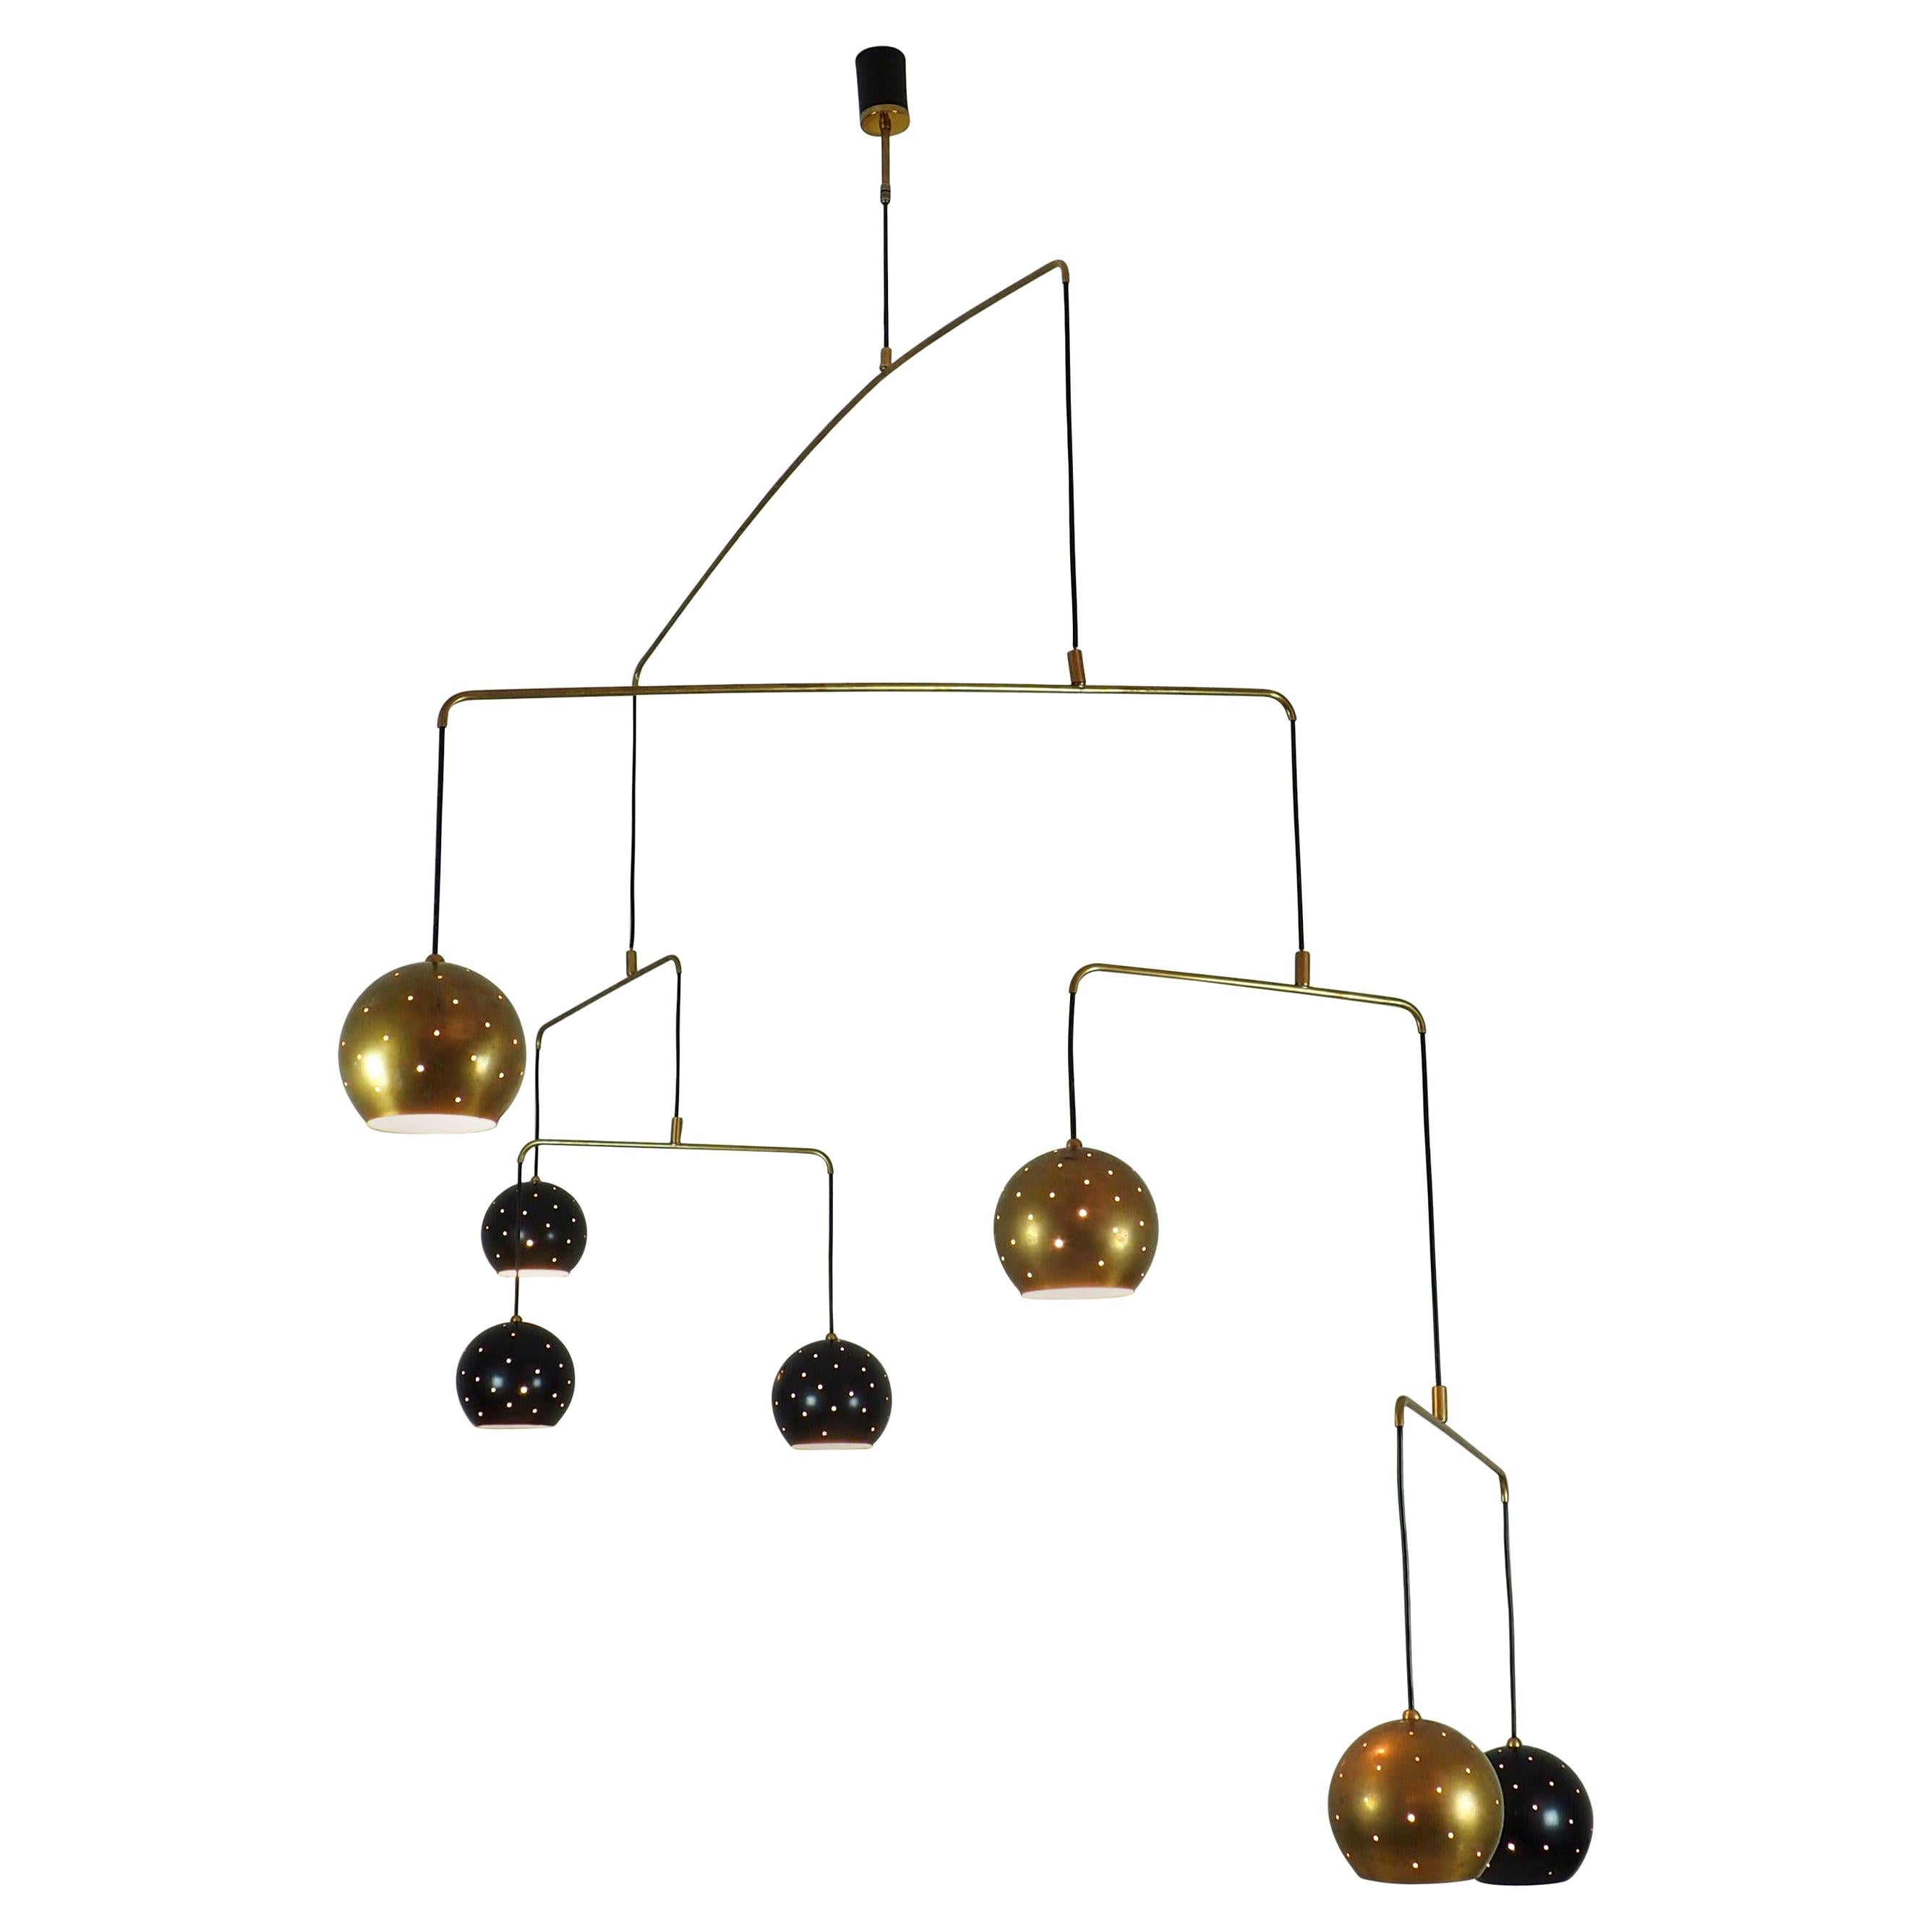 Original Italian brass mobile chandelier manufactured in a very small handcraft production in Milano, 
Large, magic and poetical mobile chandelier with brass and black suspending spheres, it can moves with the flow of air.
Wholly in balance